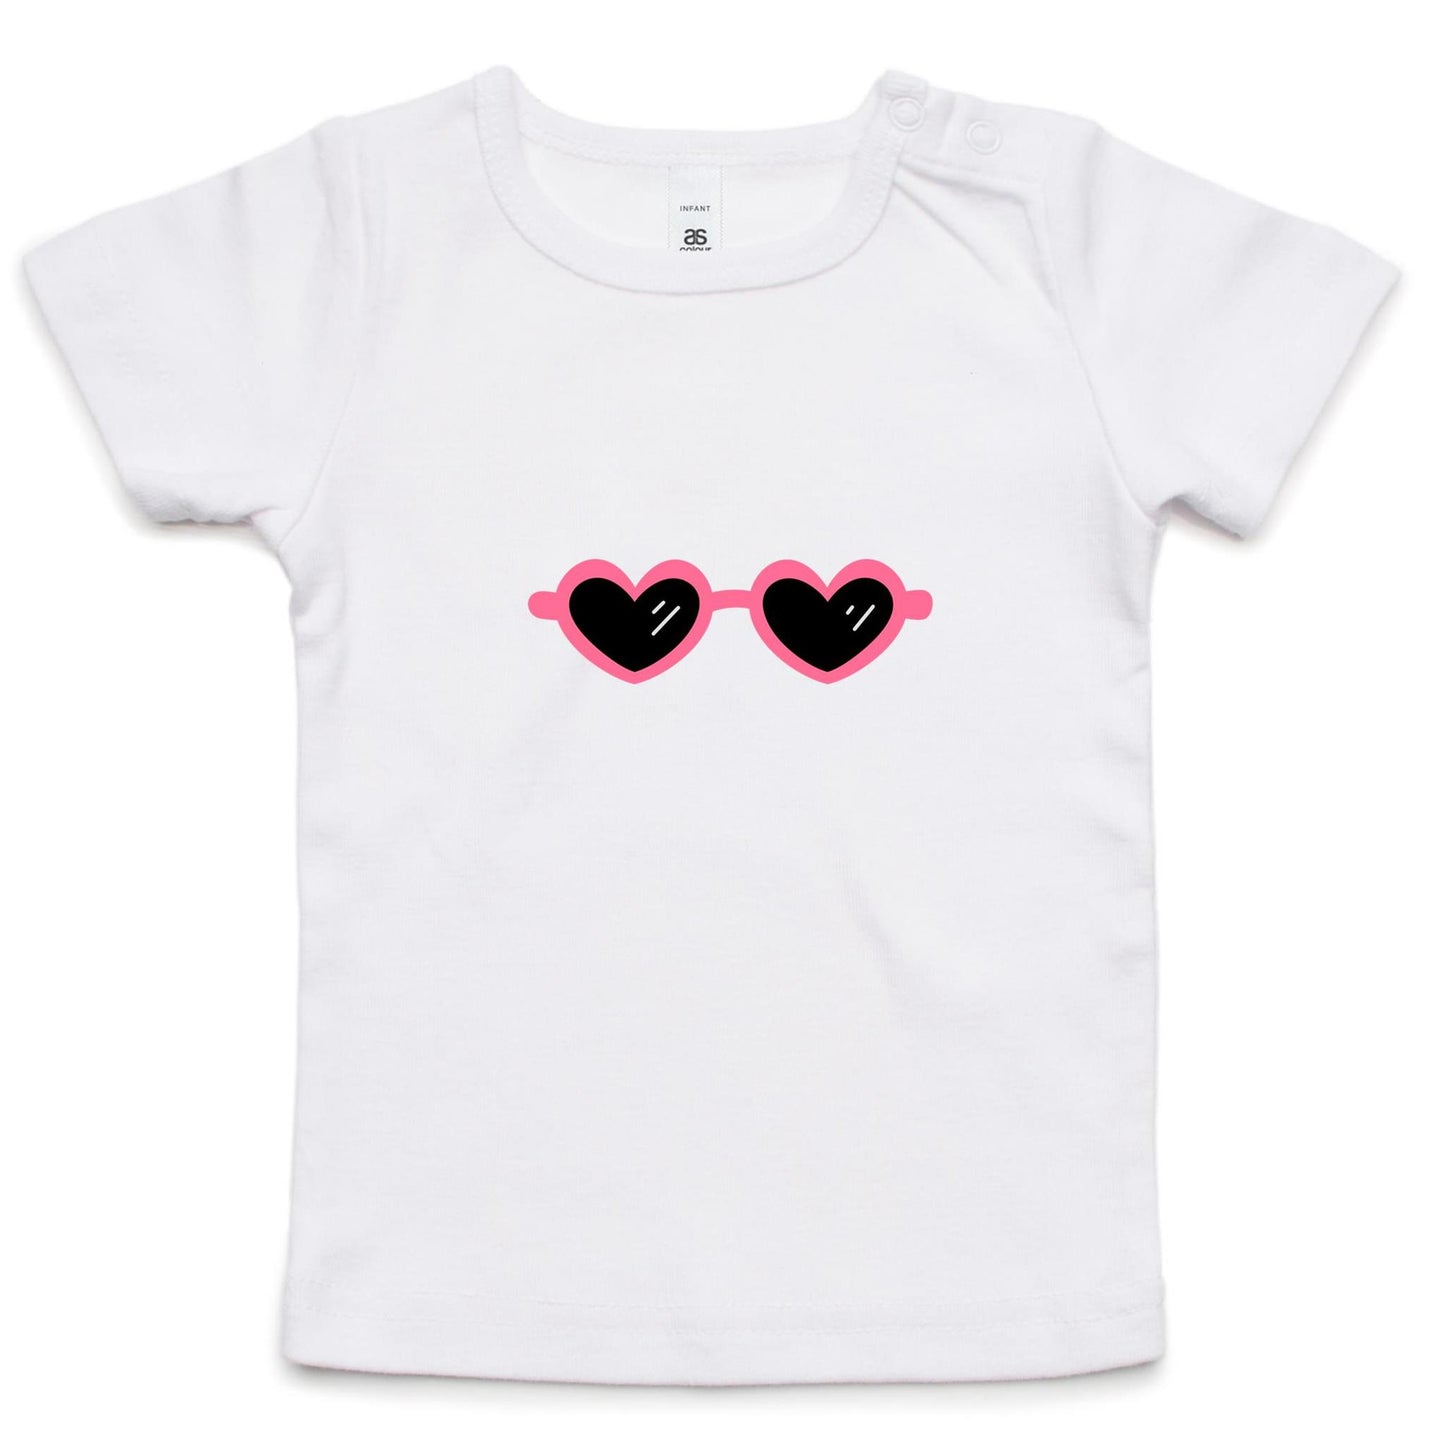 pink sunglasses - Infant Wee Tee